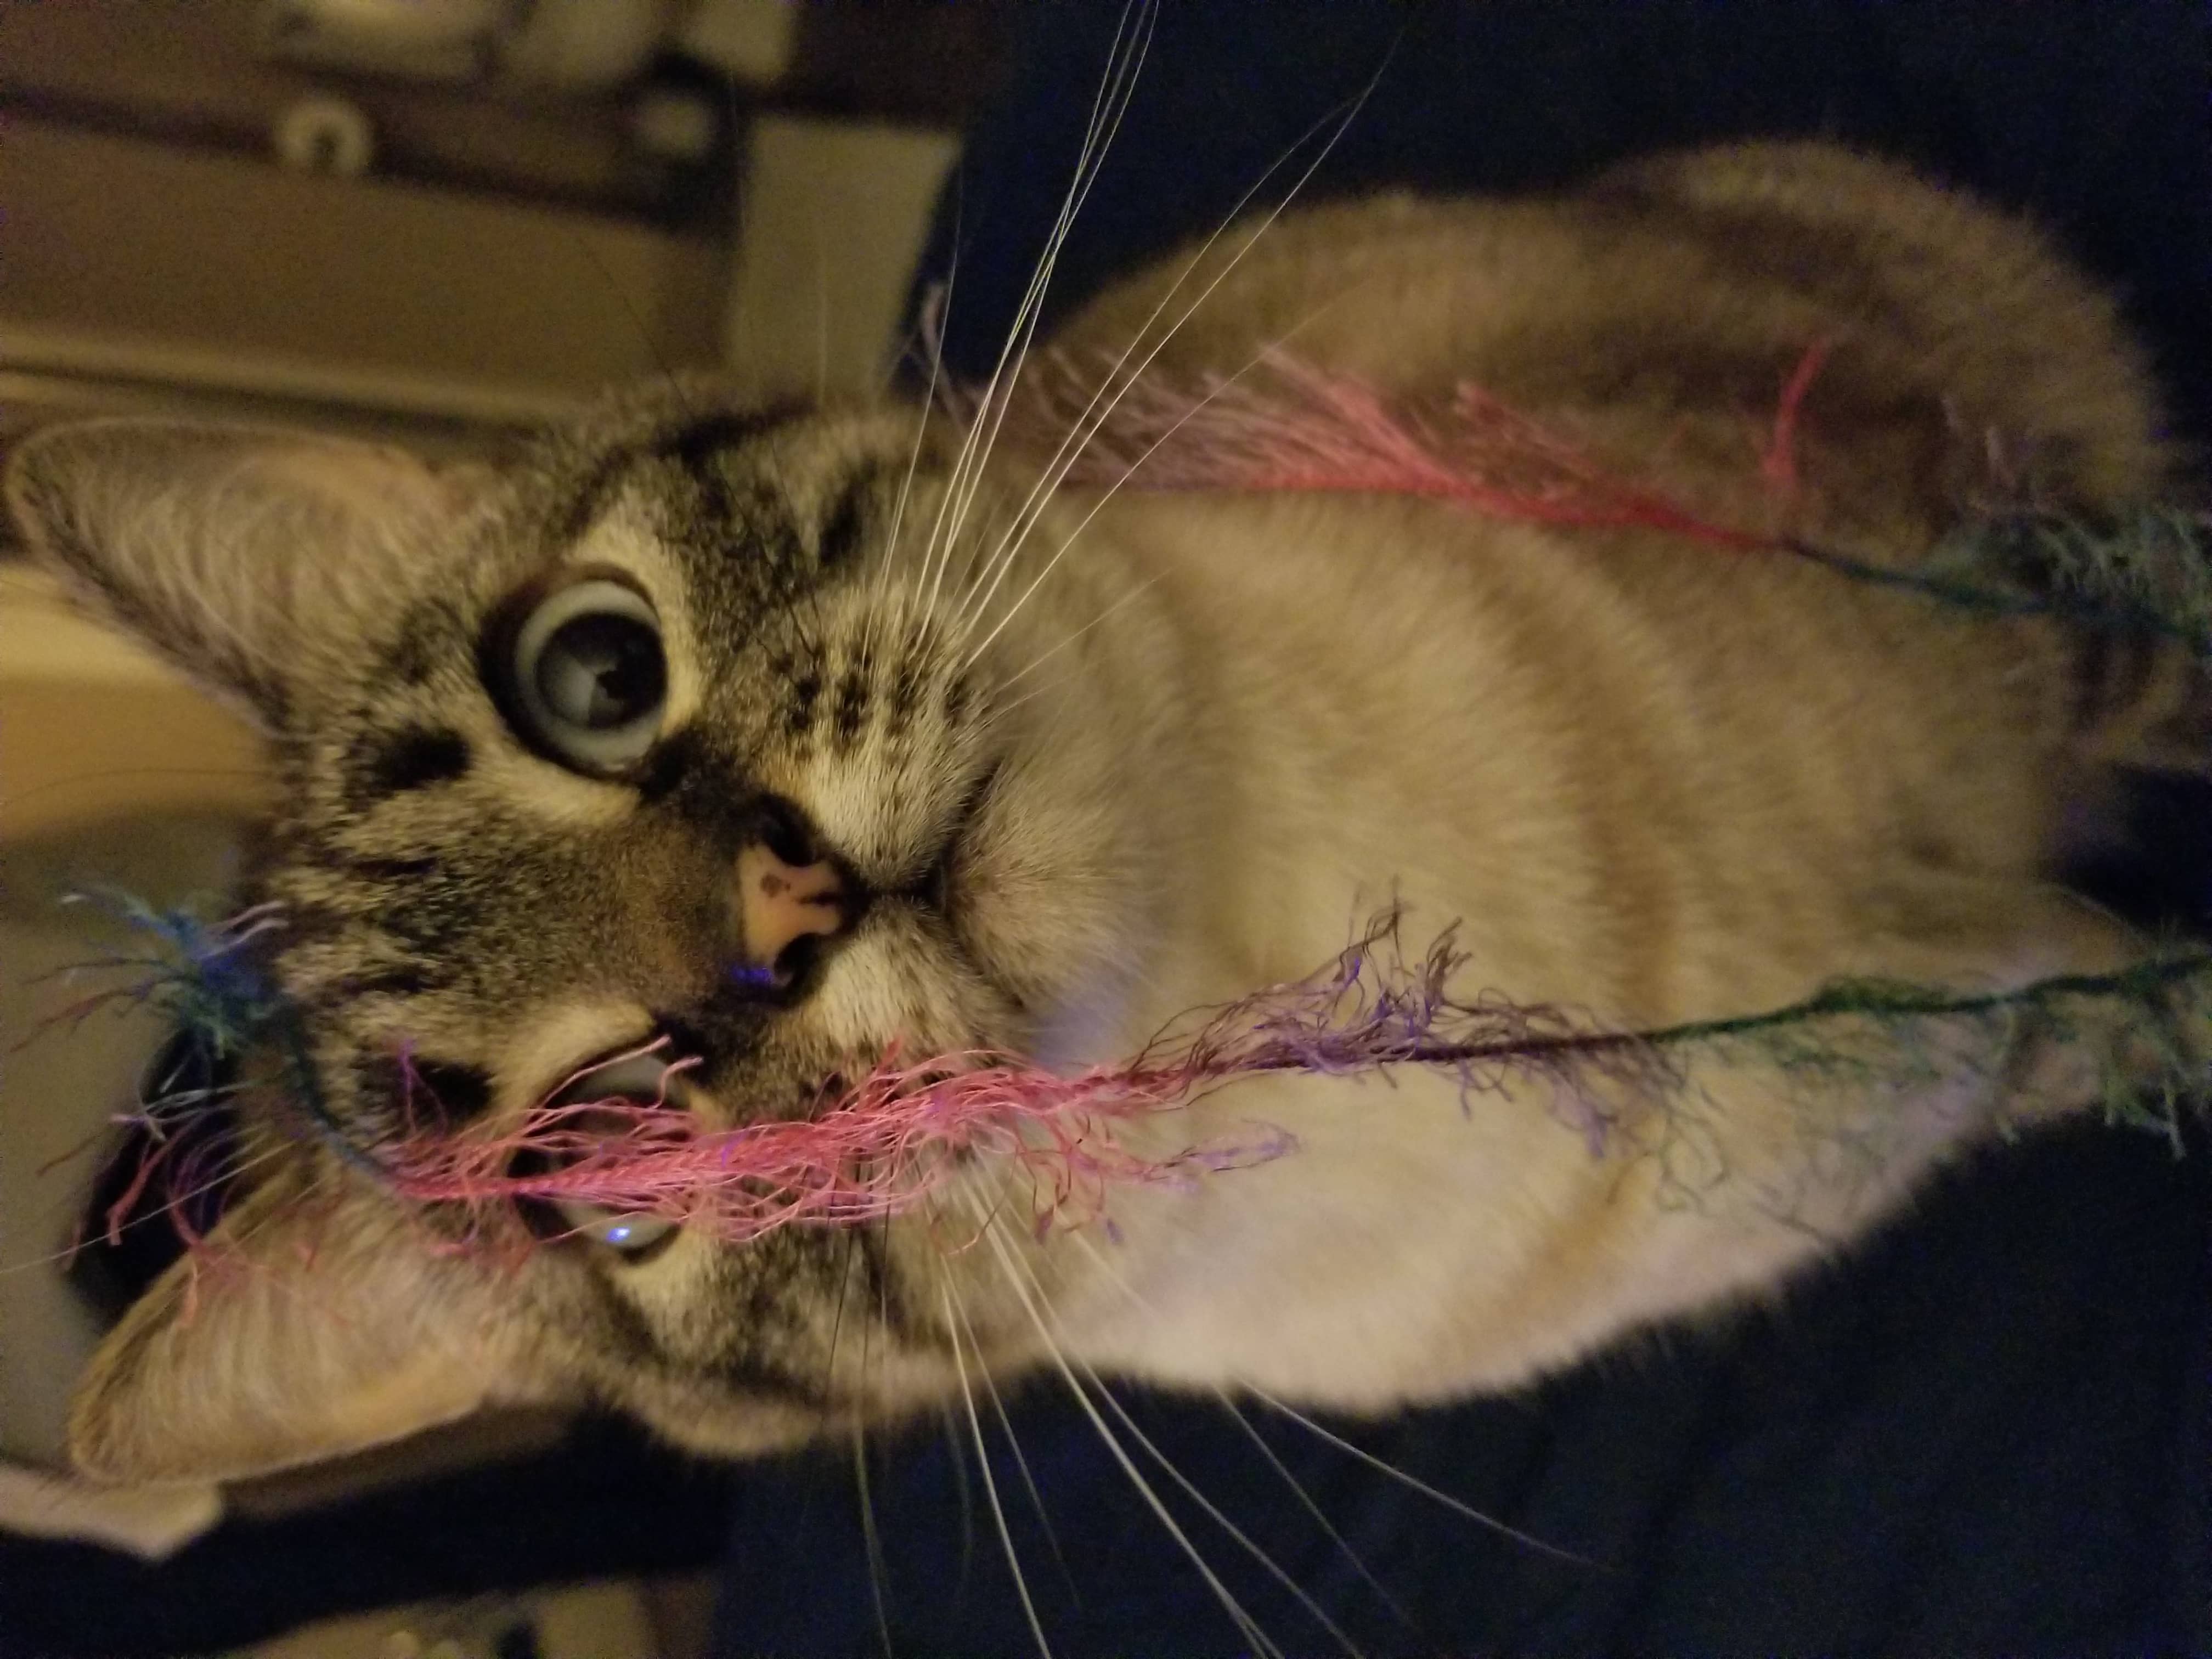 Cricket playing with string ^.^